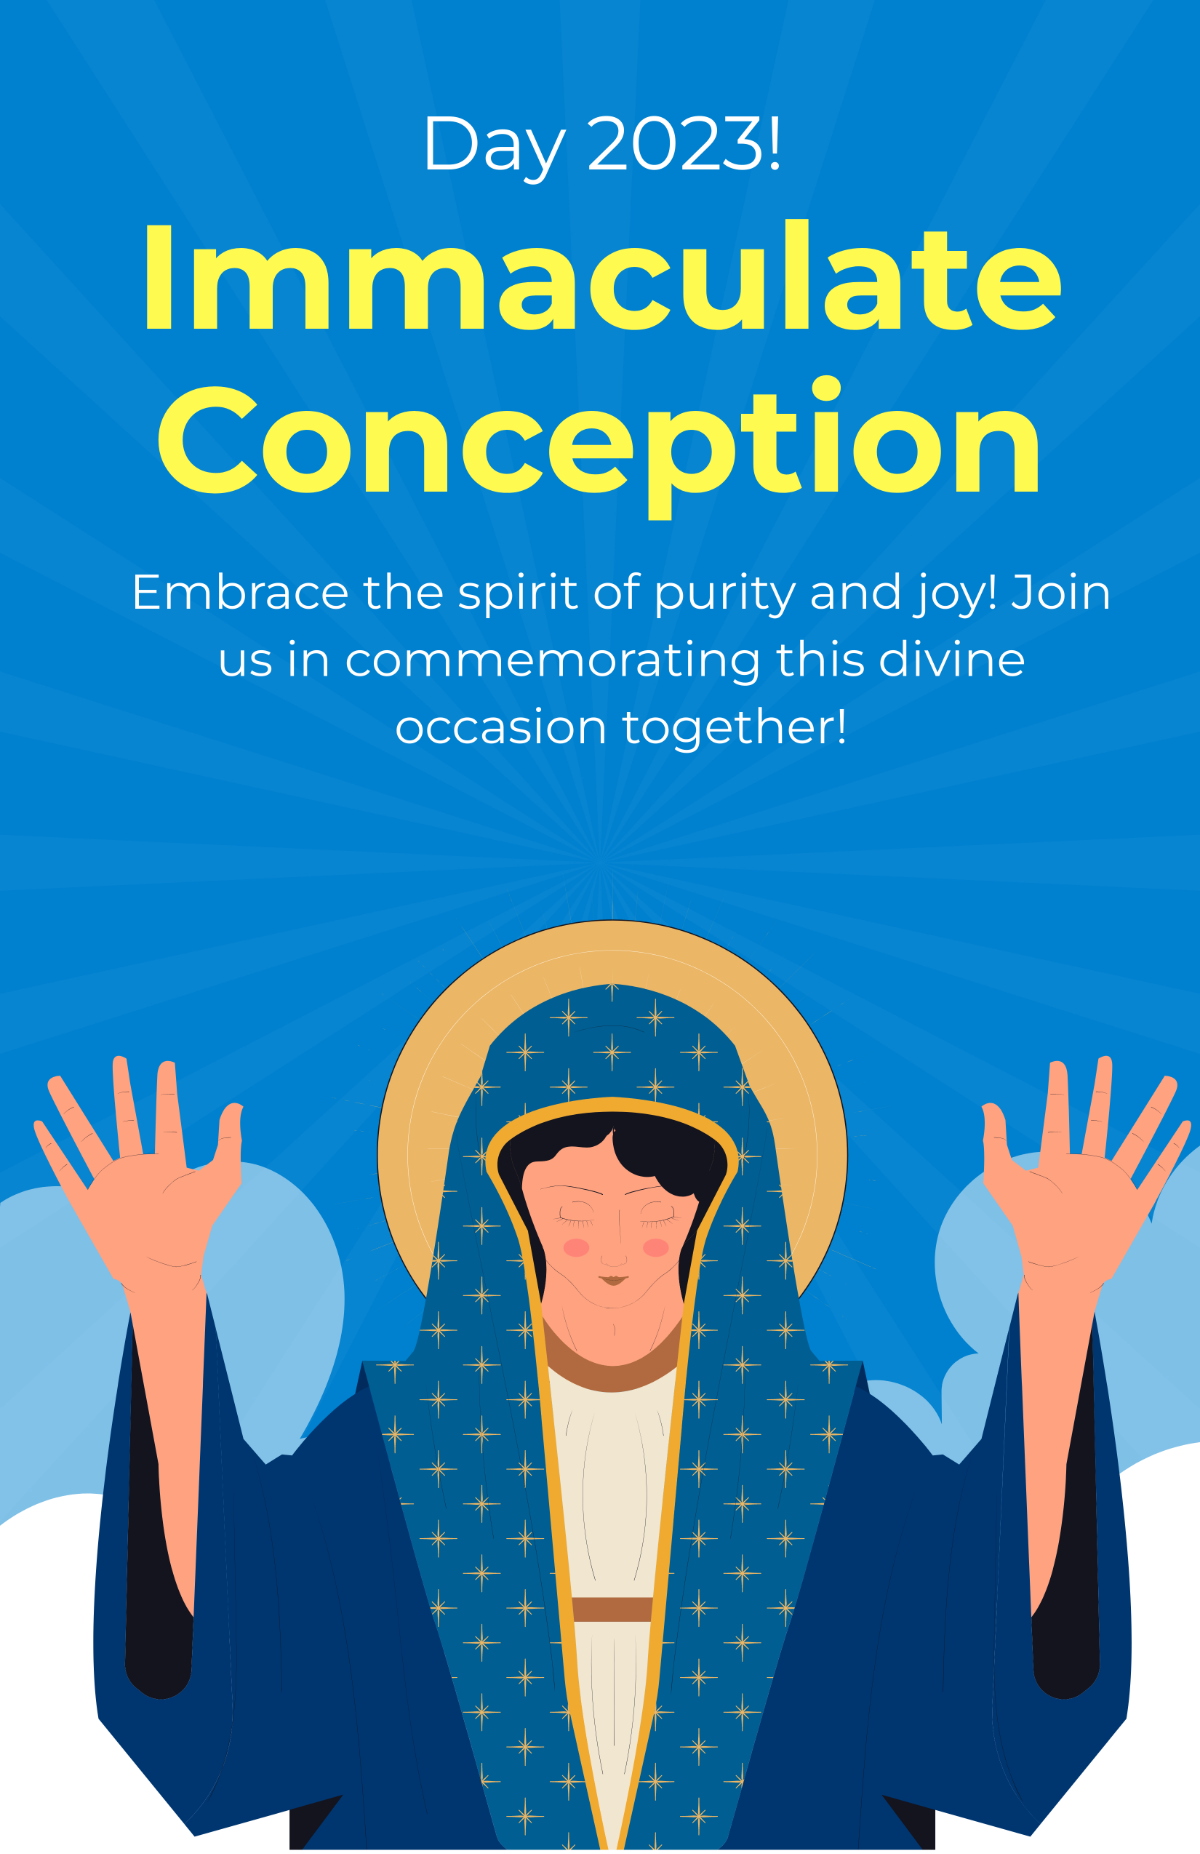 Feast of the Immaculate Conception Day 2023 Poster